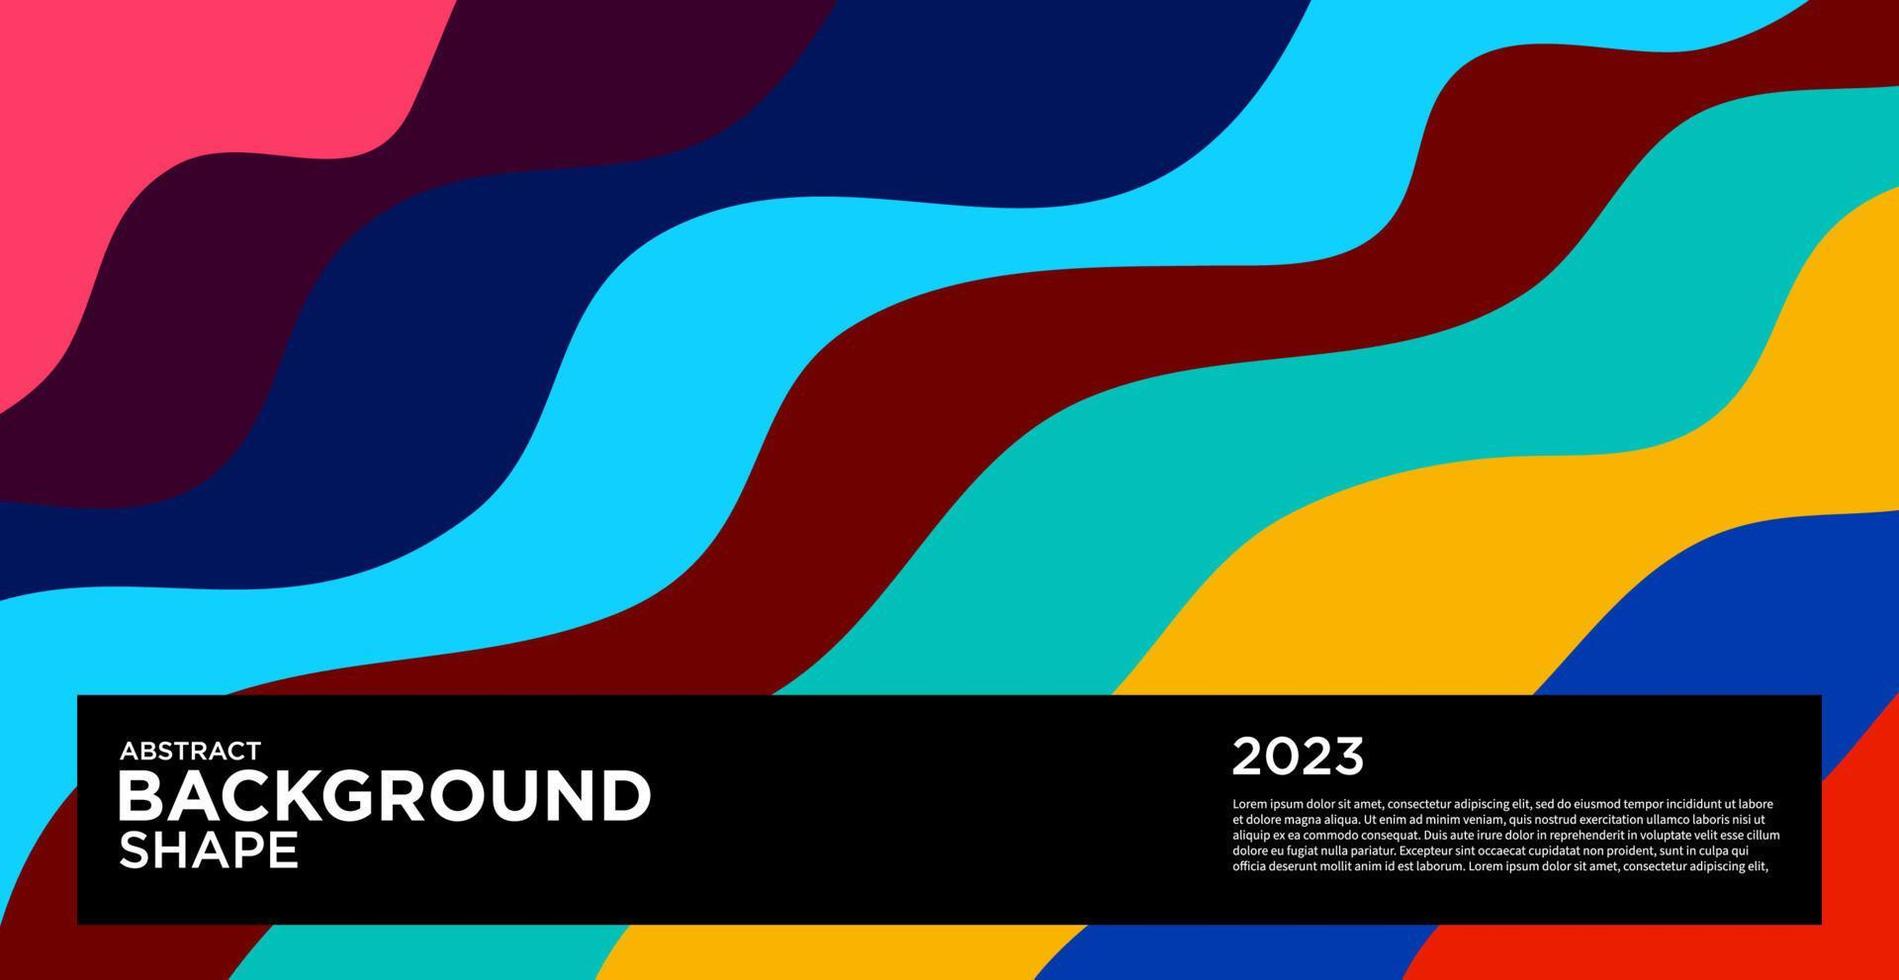 New year 2023 design template with fluid colorful abstract, colorful background, poster, flyer, social media vector